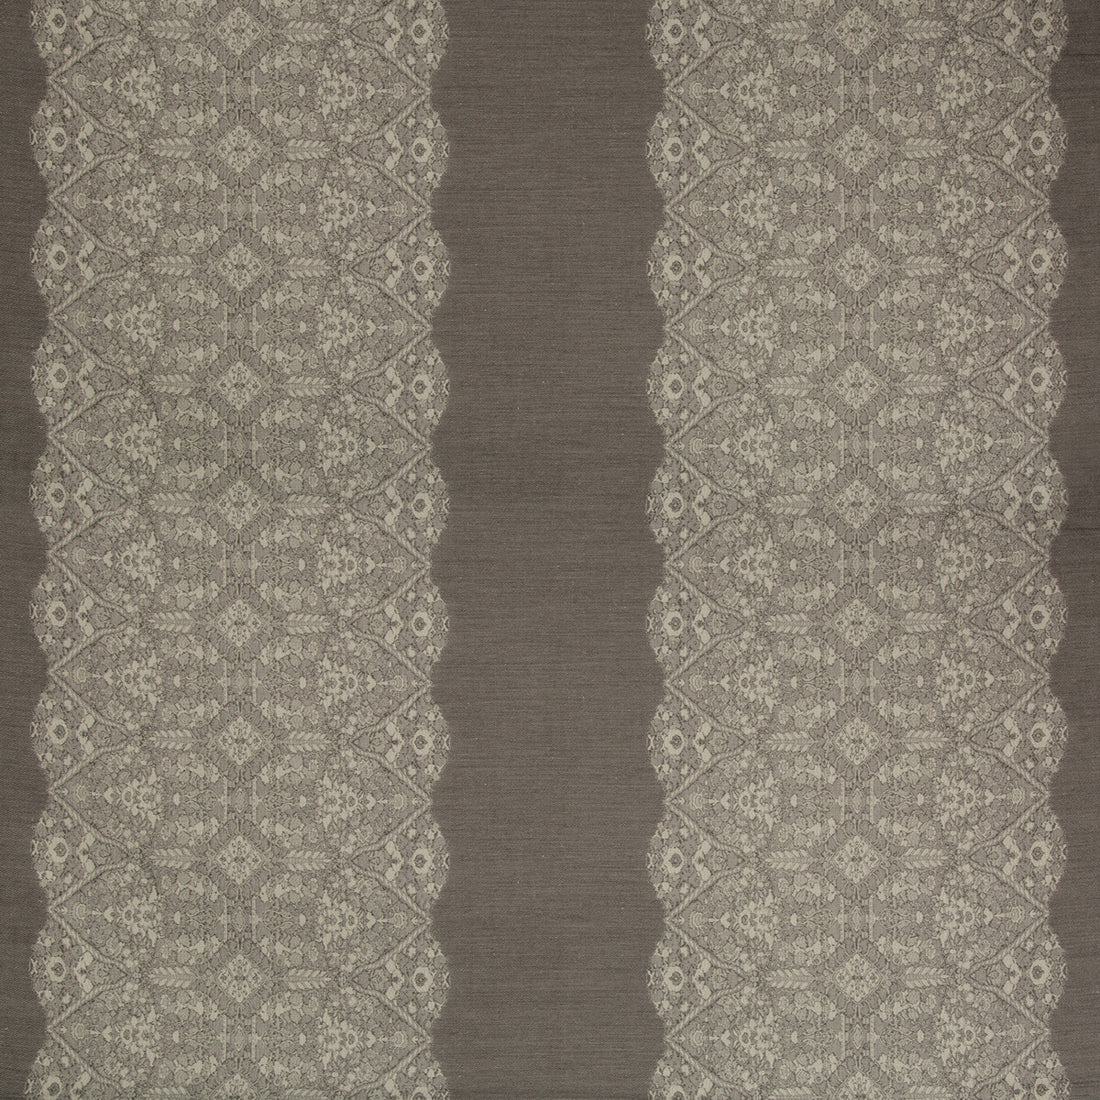 Garrick Paisley fabric in sable color - pattern 4554.21.0 - by Kravet Couture in the David Phoenix Well-Suited collection